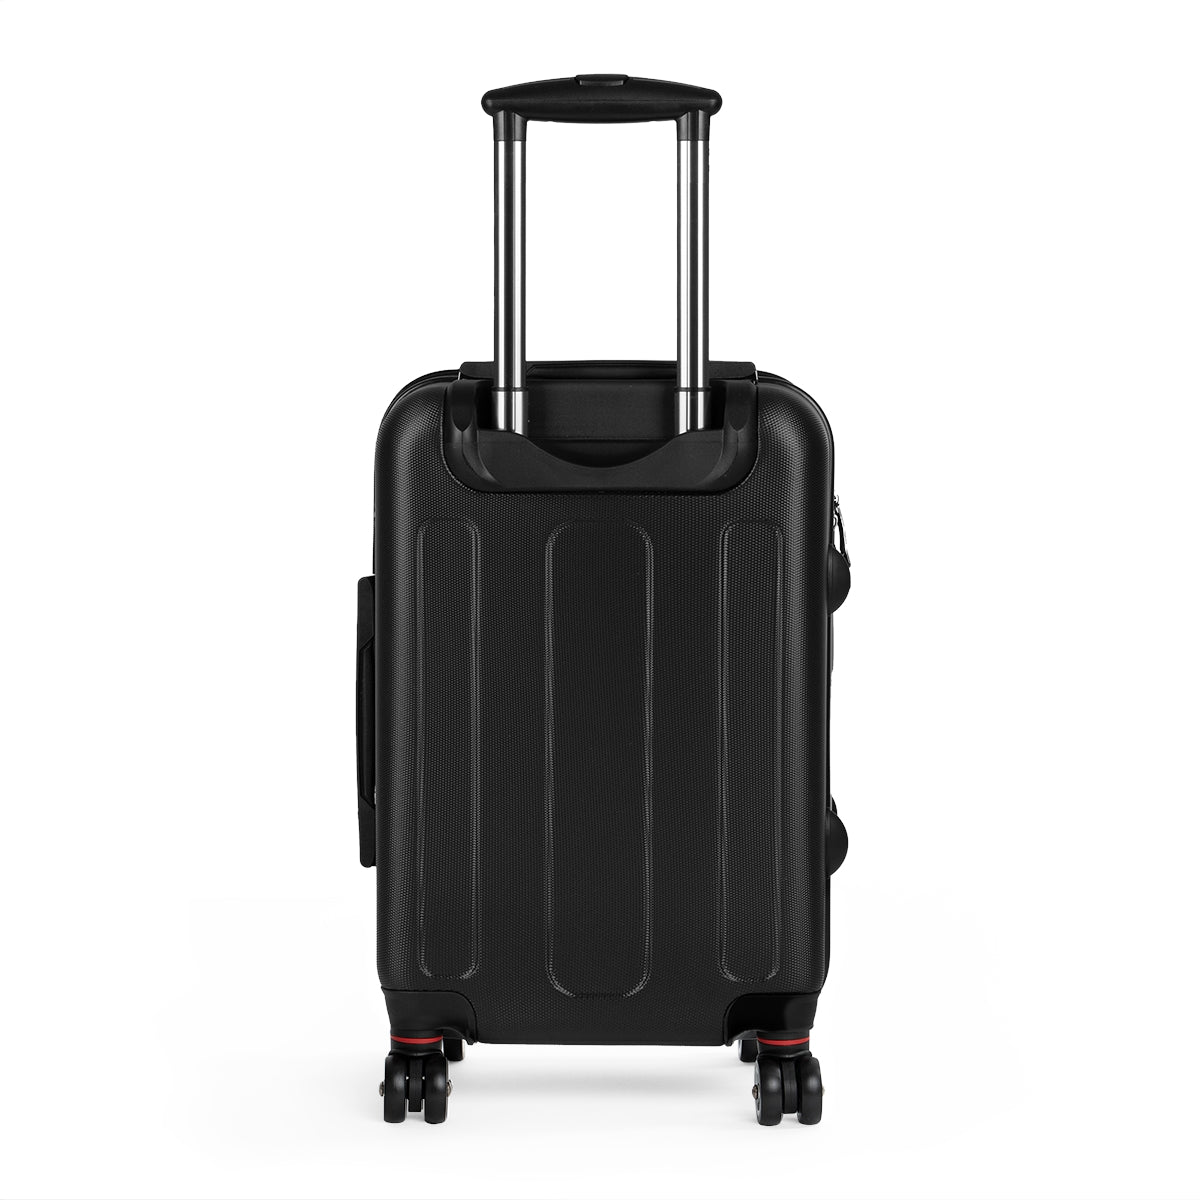 CARRY-ON LUGGAGE SET, FASHION DESIGNER CABIN SUITCASE AND CHECK IN LUGGAGE WITH WHEELS FOR WOMEN